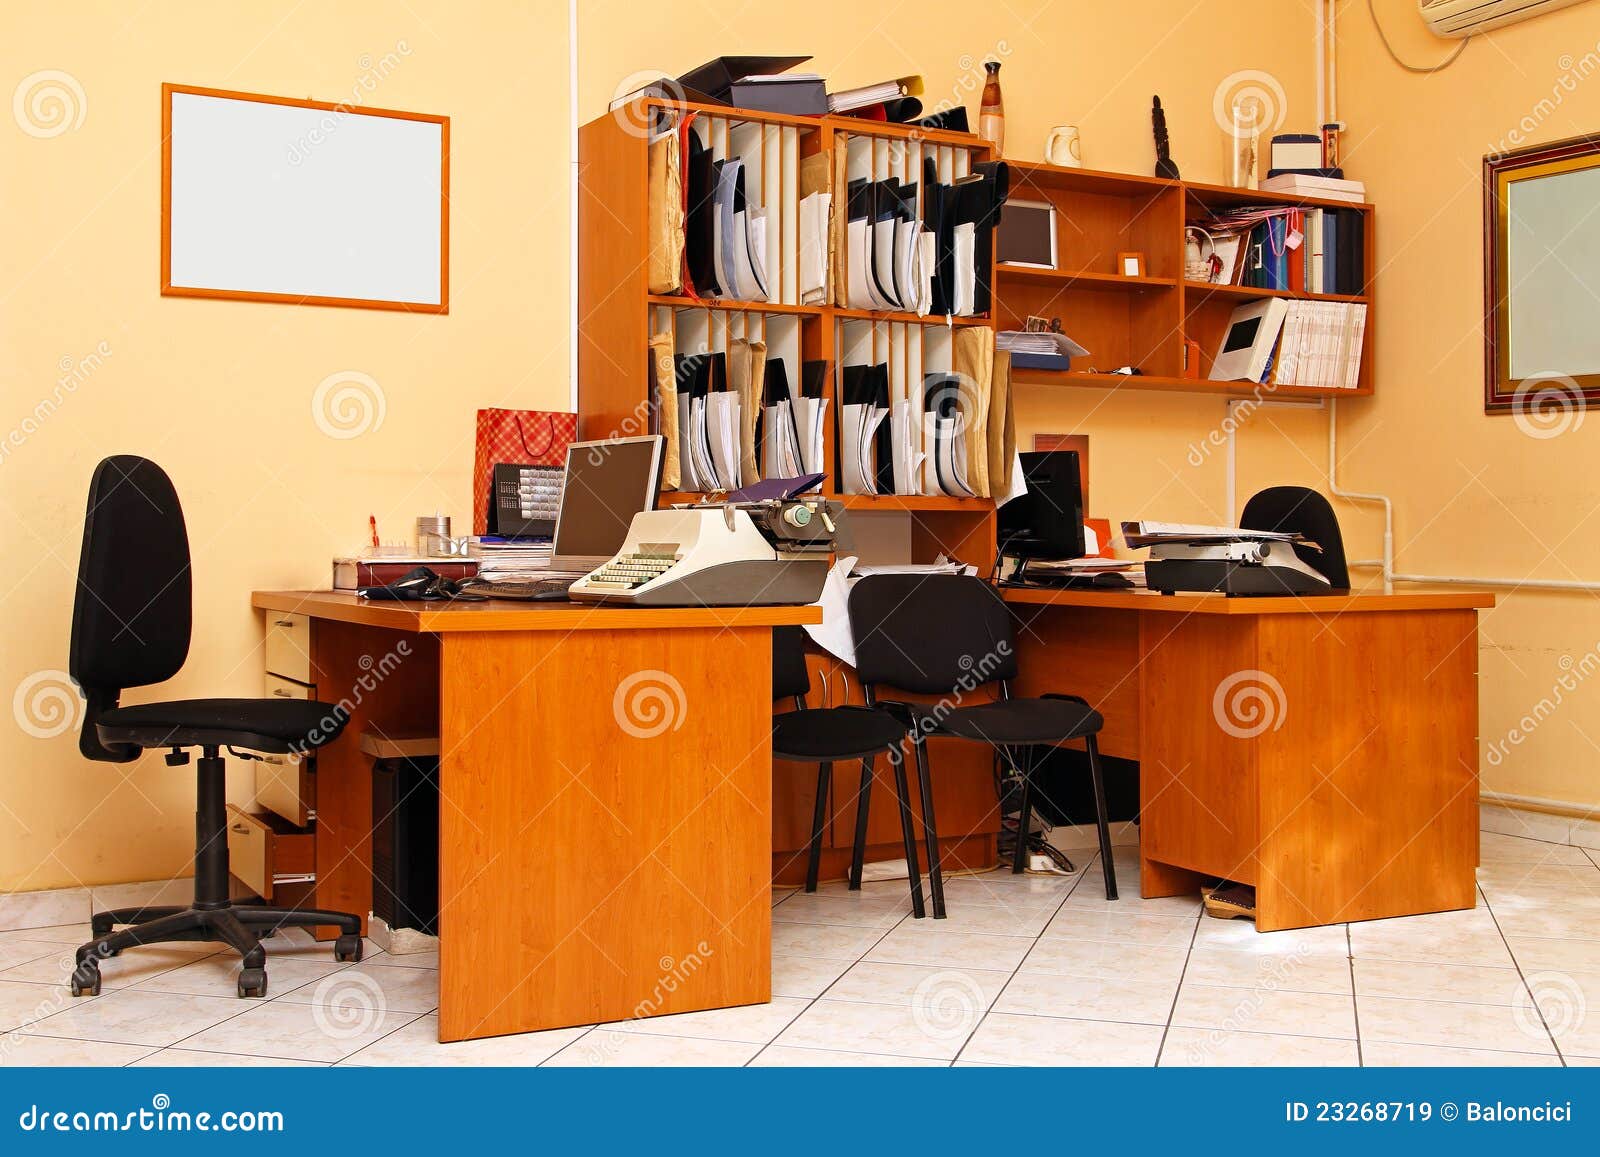 Doctors Office Royalty Free Stock Images - Image: 23268719